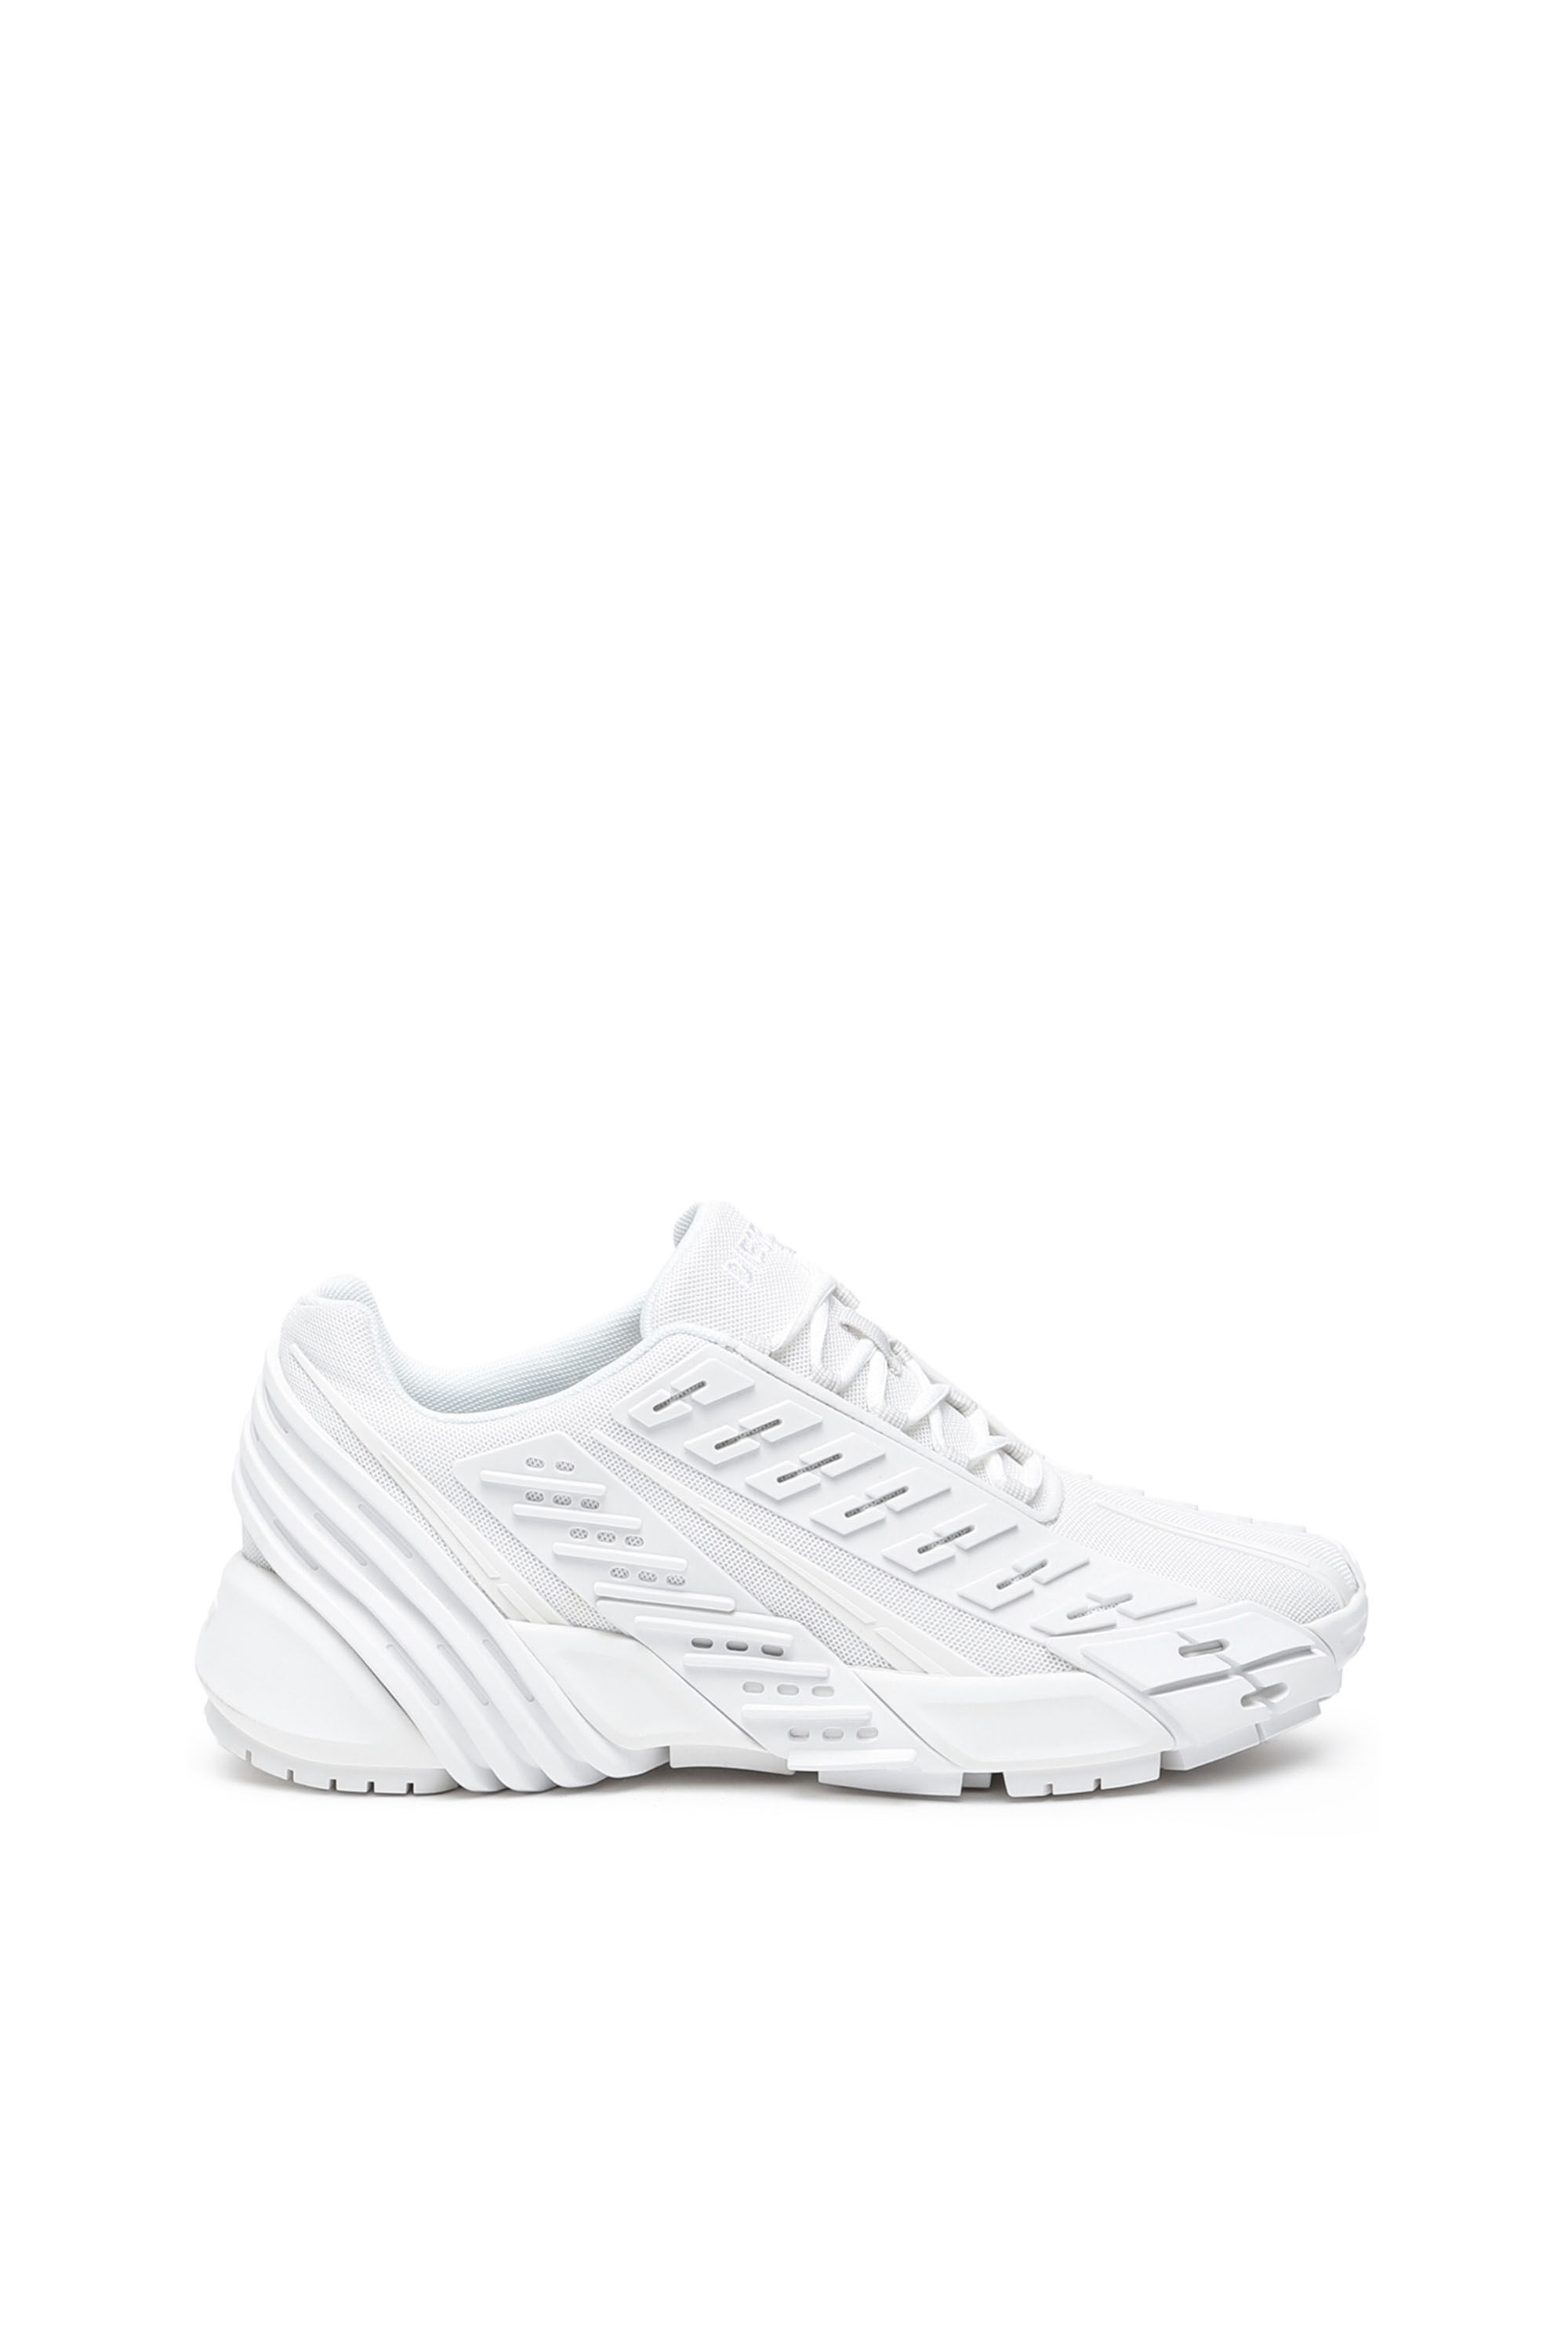 Diesel - S-PROTOTYPE LOW, Man S-Prototype Low - Sneakers in mesh and rubber in White - Image 1